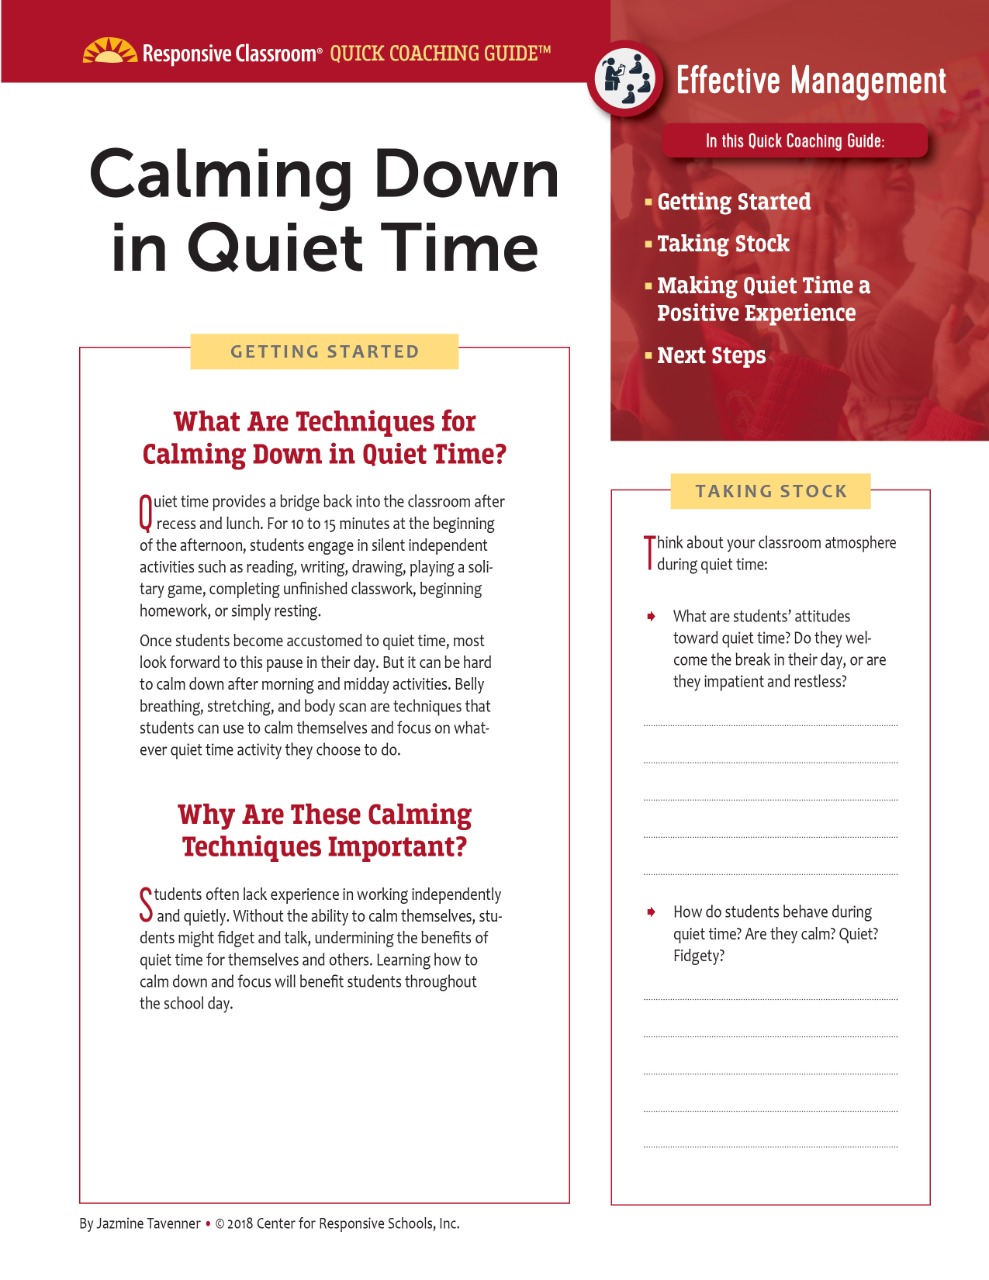 https://www.responsiveclassroom.org/wp-content/uploads/2019/01/Quick-Coaching-Guide-Calming-Down-in-Quiet-Time.jpeg